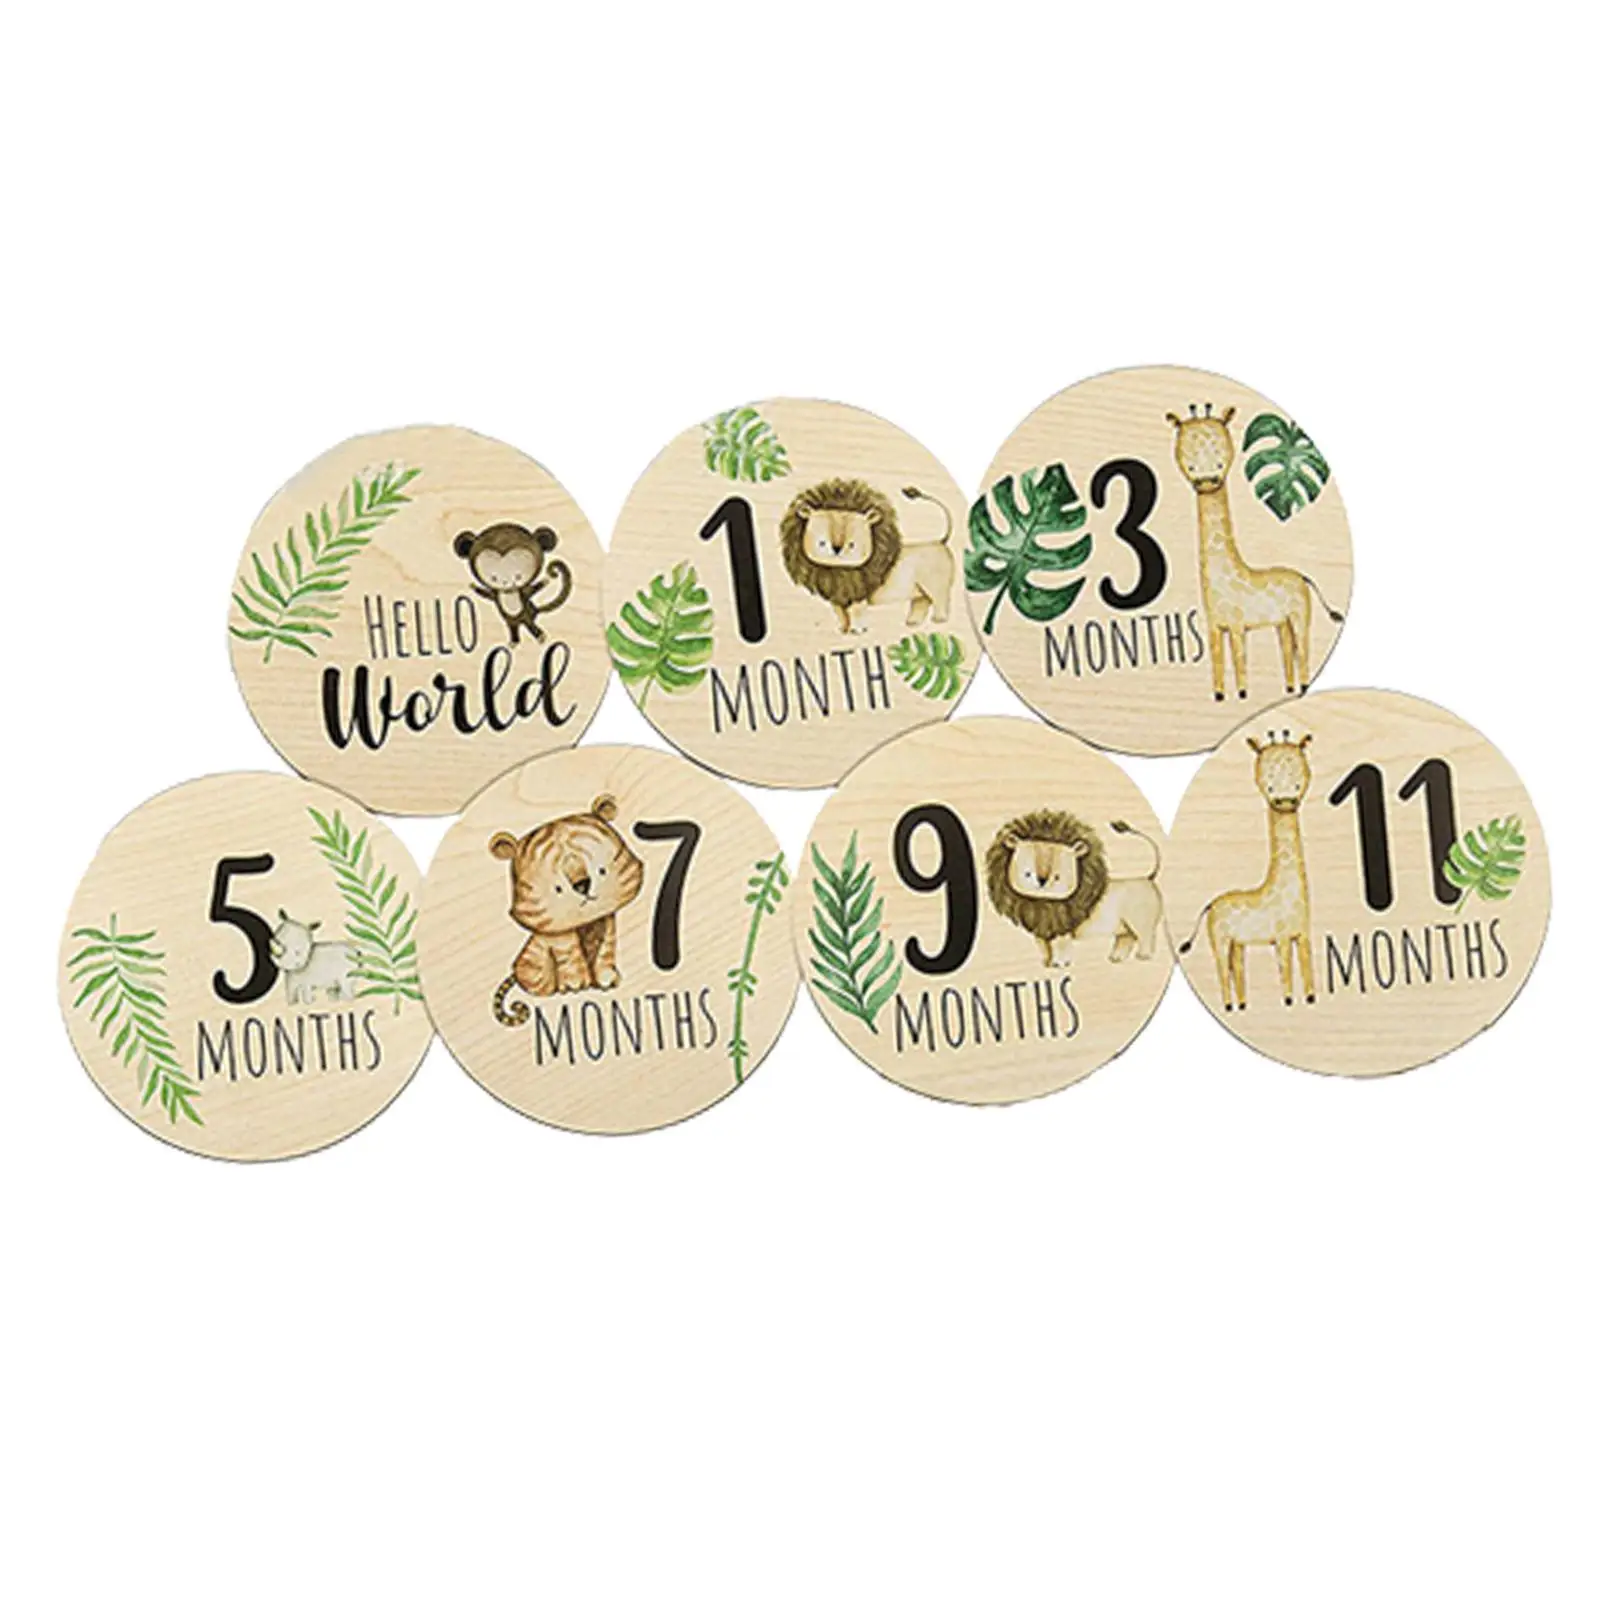 7x Wooden Baby Milestone Cards Discs for Newborn Photo Props Baby Growth